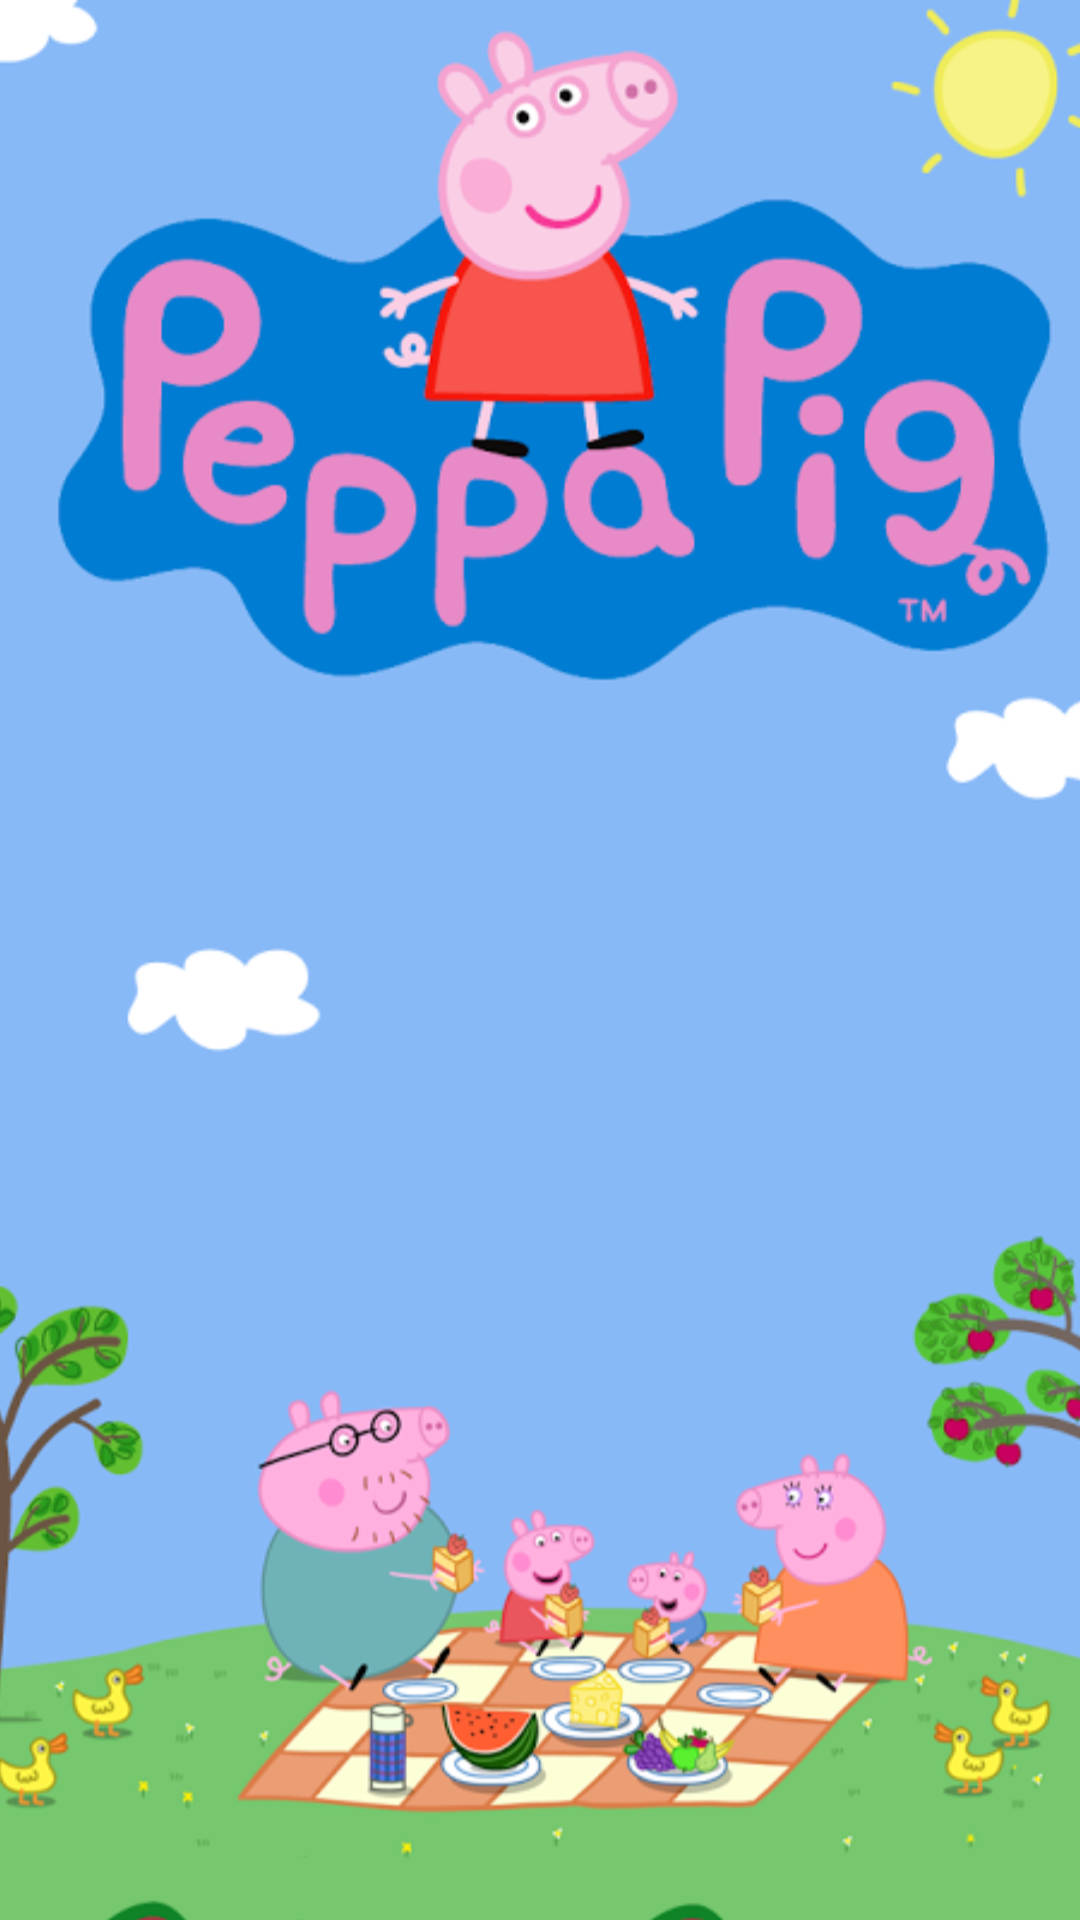 Peppa Pig Iphone Family Picnic Outdoors Background